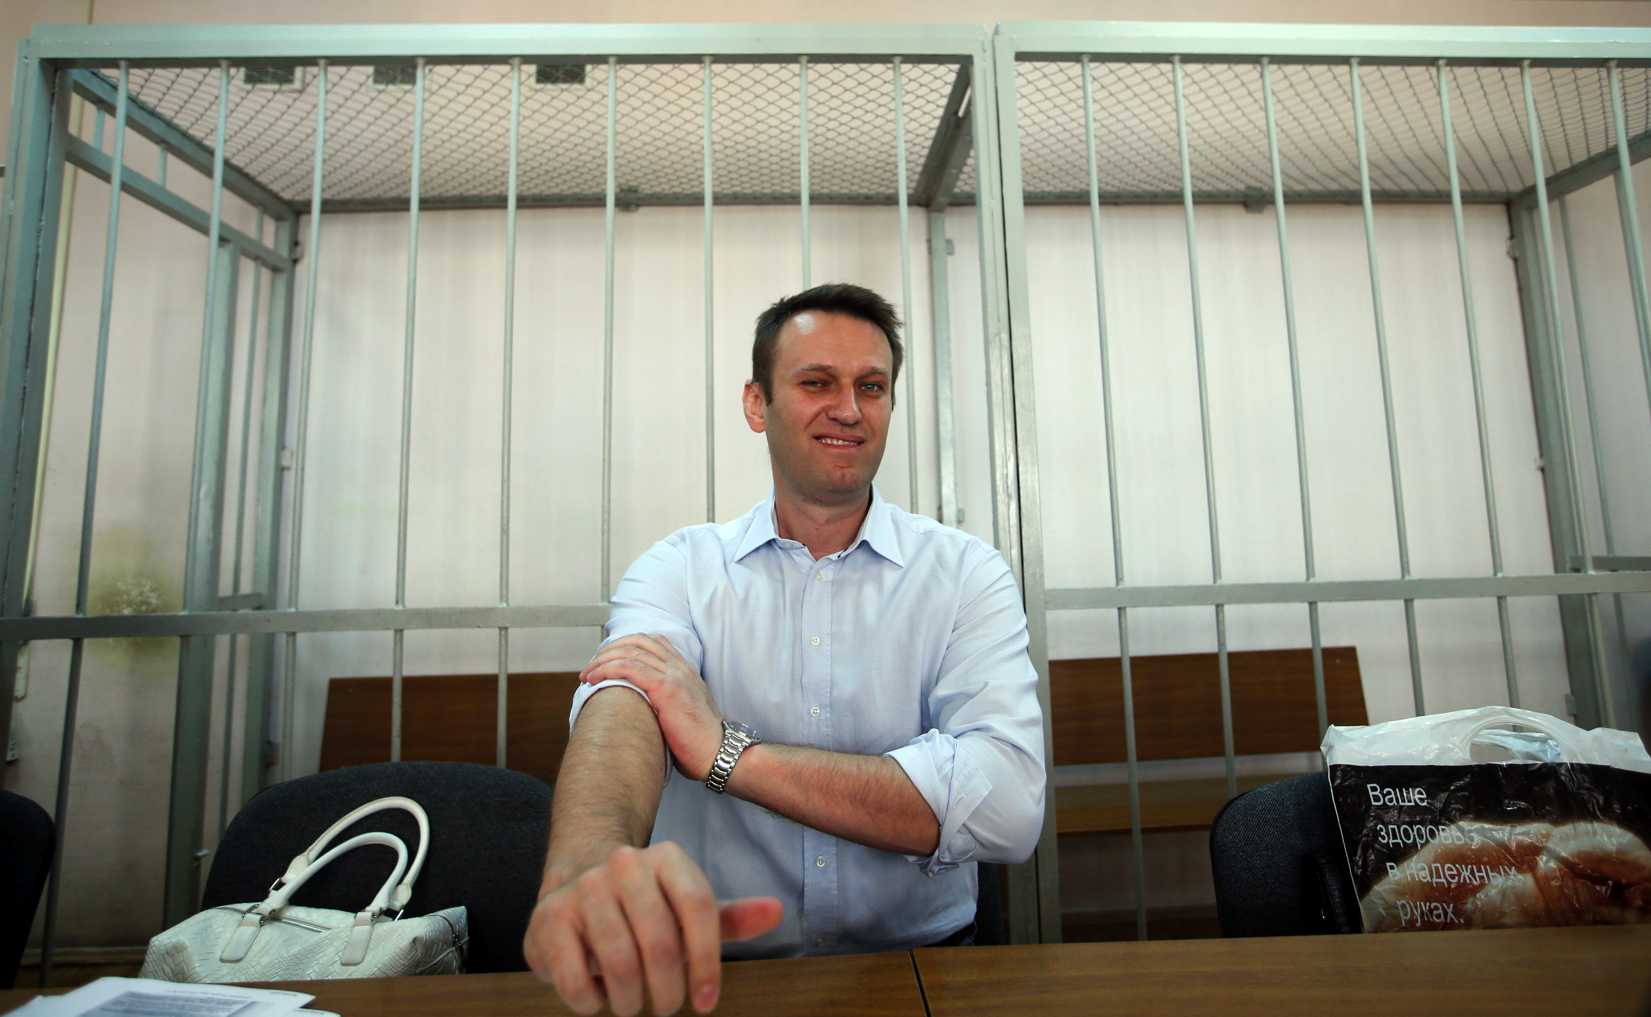 Russian opposition leader and anti-corruption blogger Alexei Navalny sits before a court hearing in Moscow, August 14, 2014. (Maxim Zmeyev—Reuters)